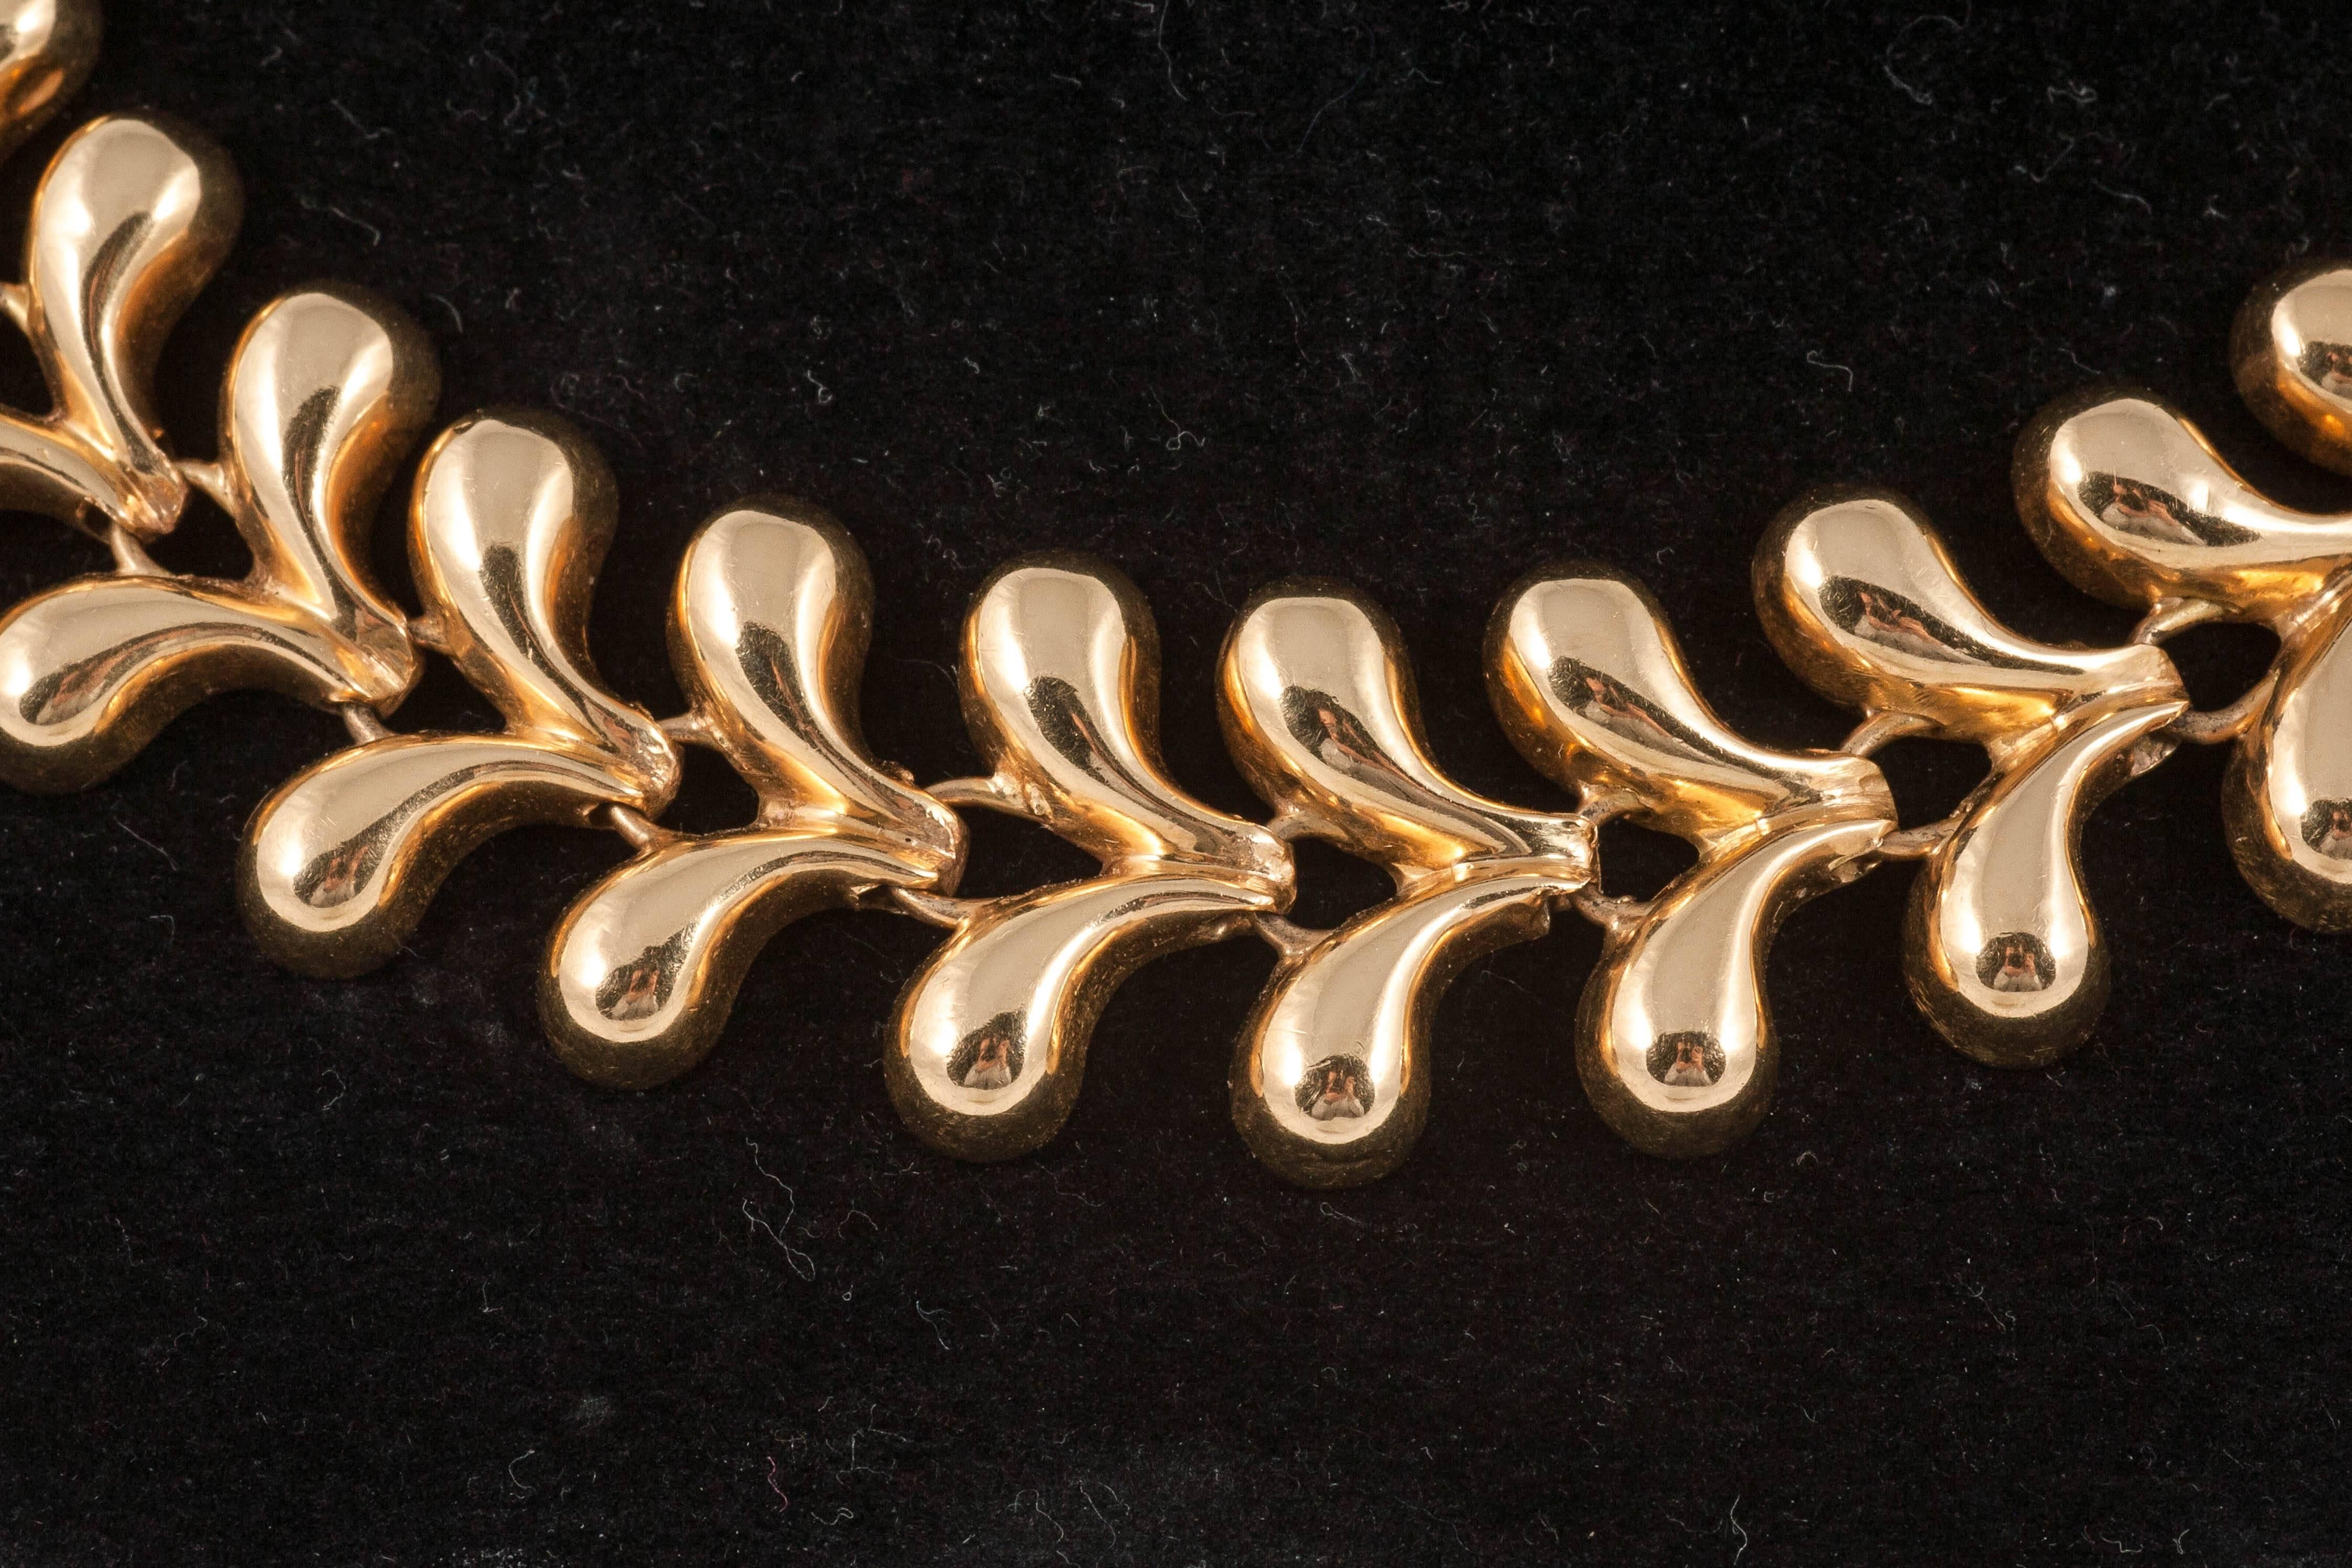 This 1940's French 18ct Gold Collar is completely articulated to fit a neck perfectly.